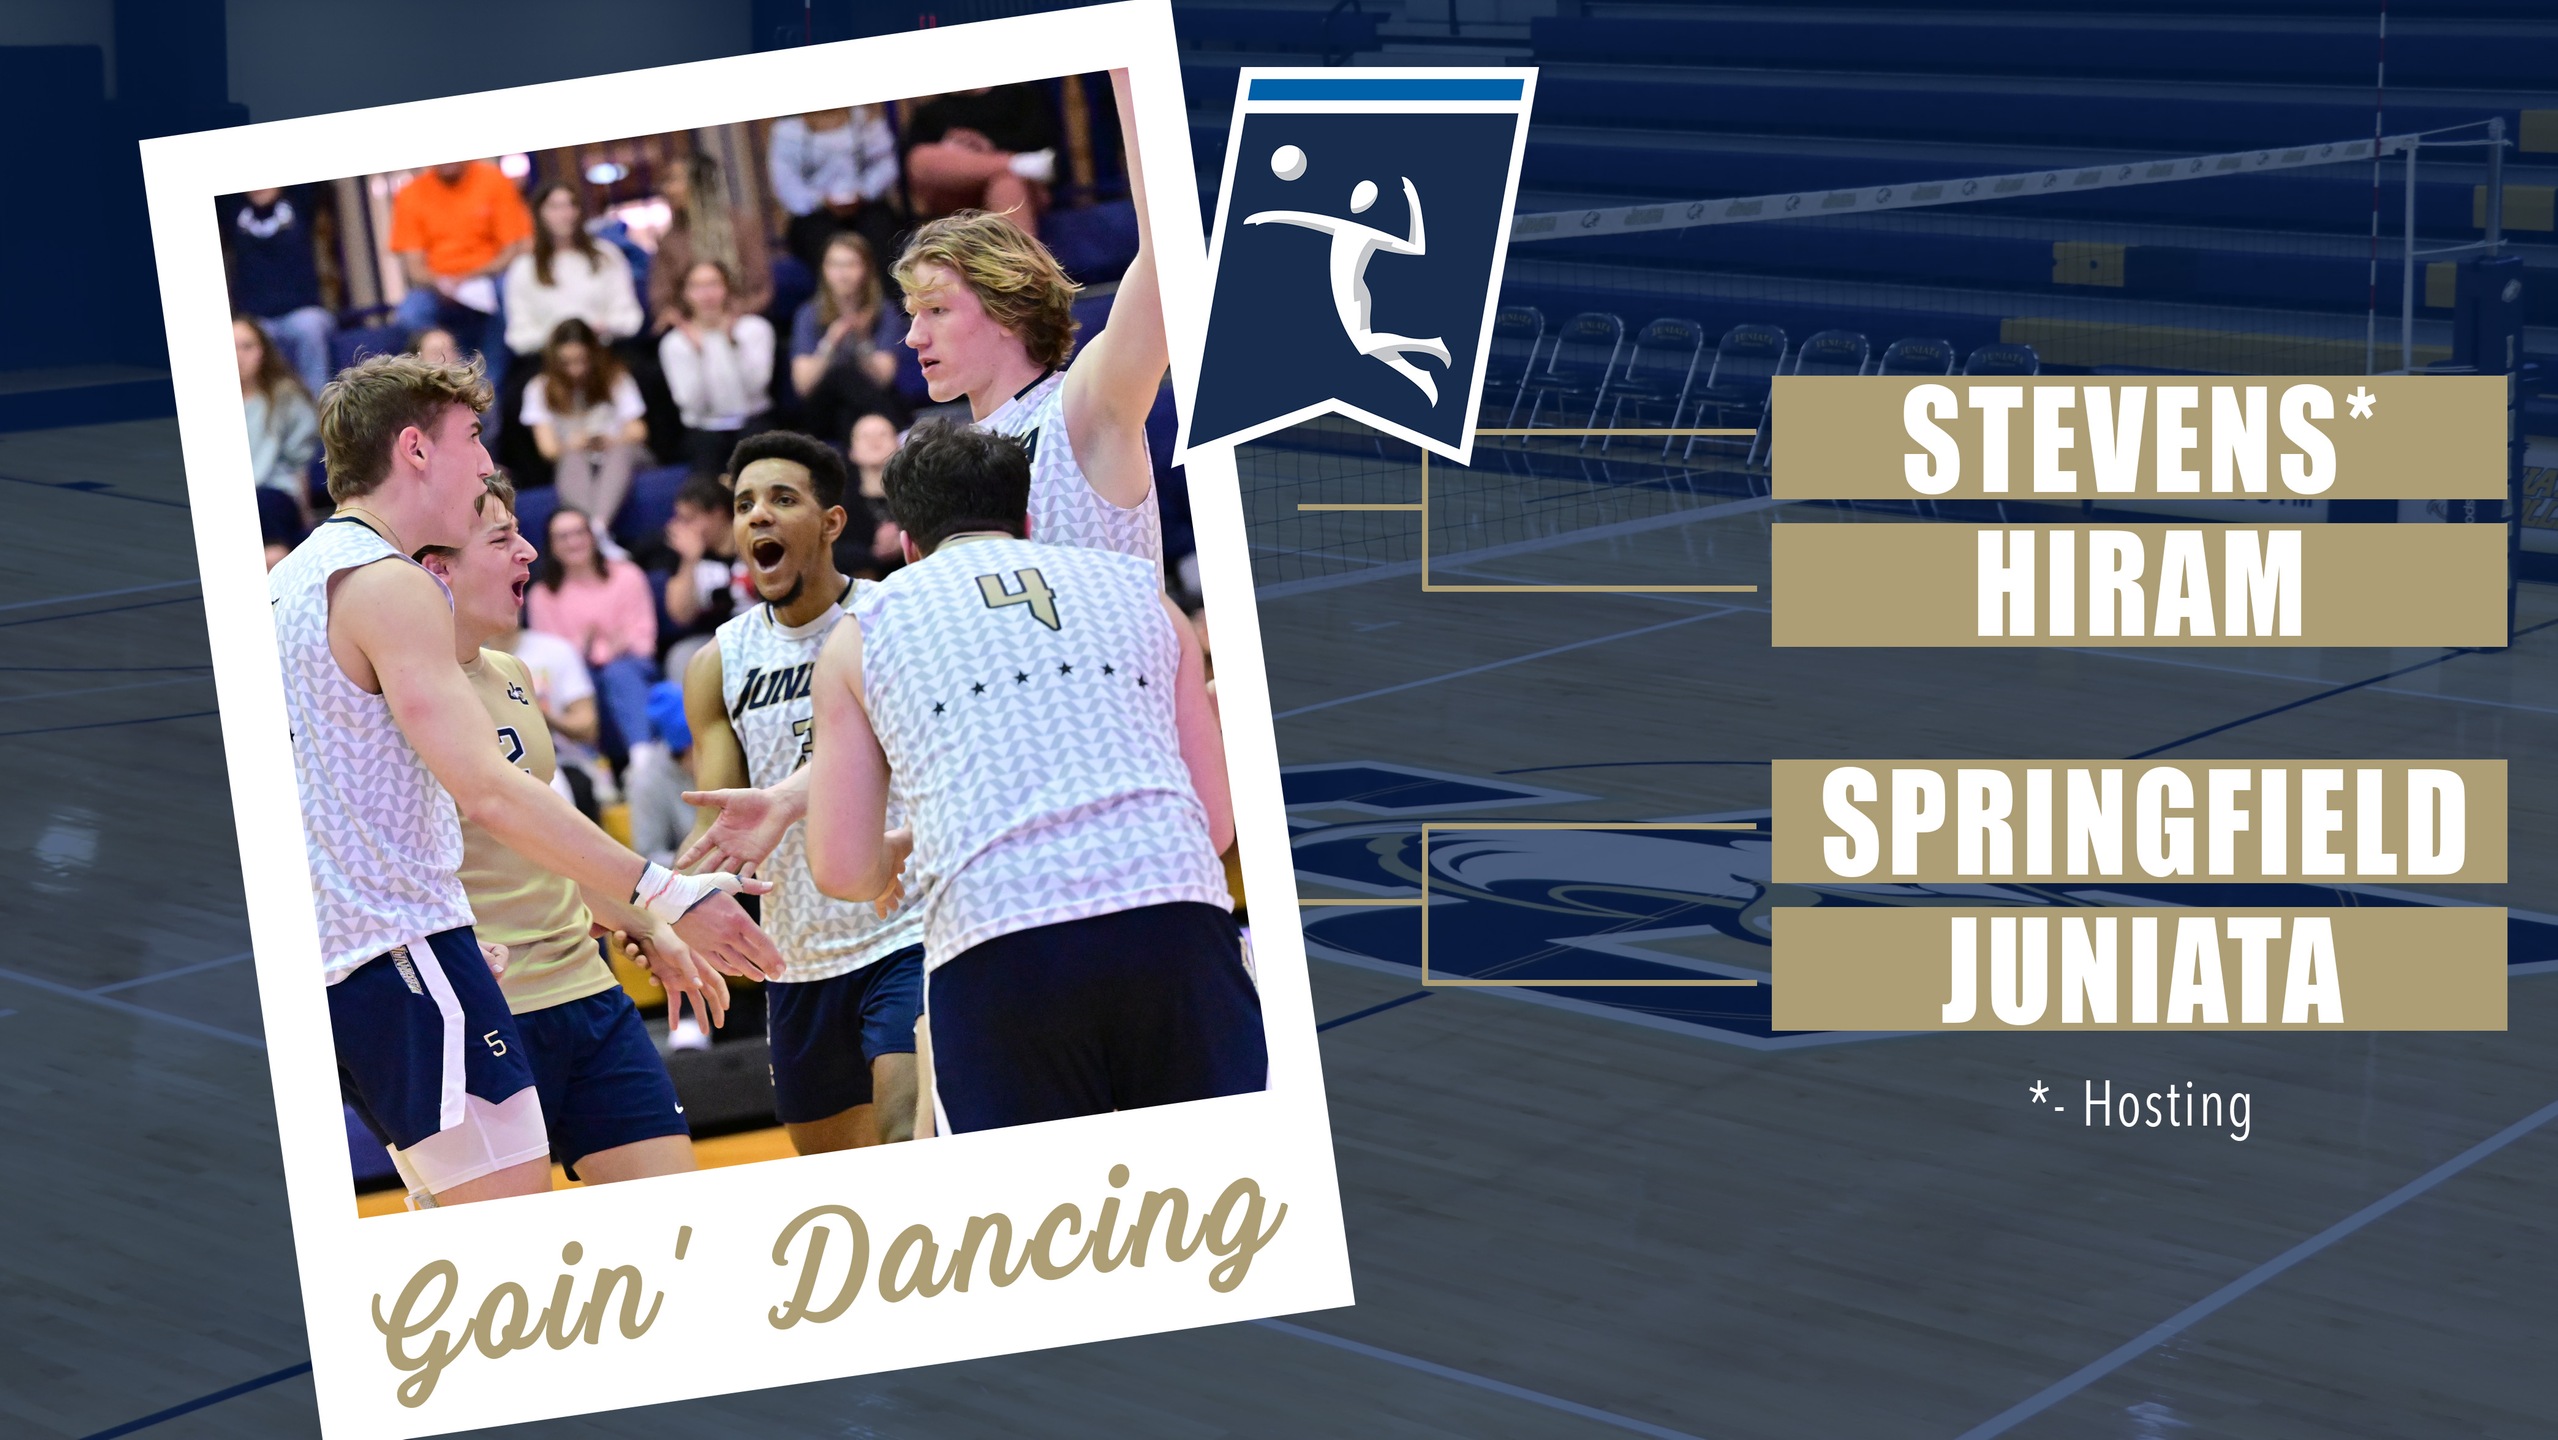 Men's Volleyball Earns At-Large NCAA Tournament Bid for Back-to-Back Appearances